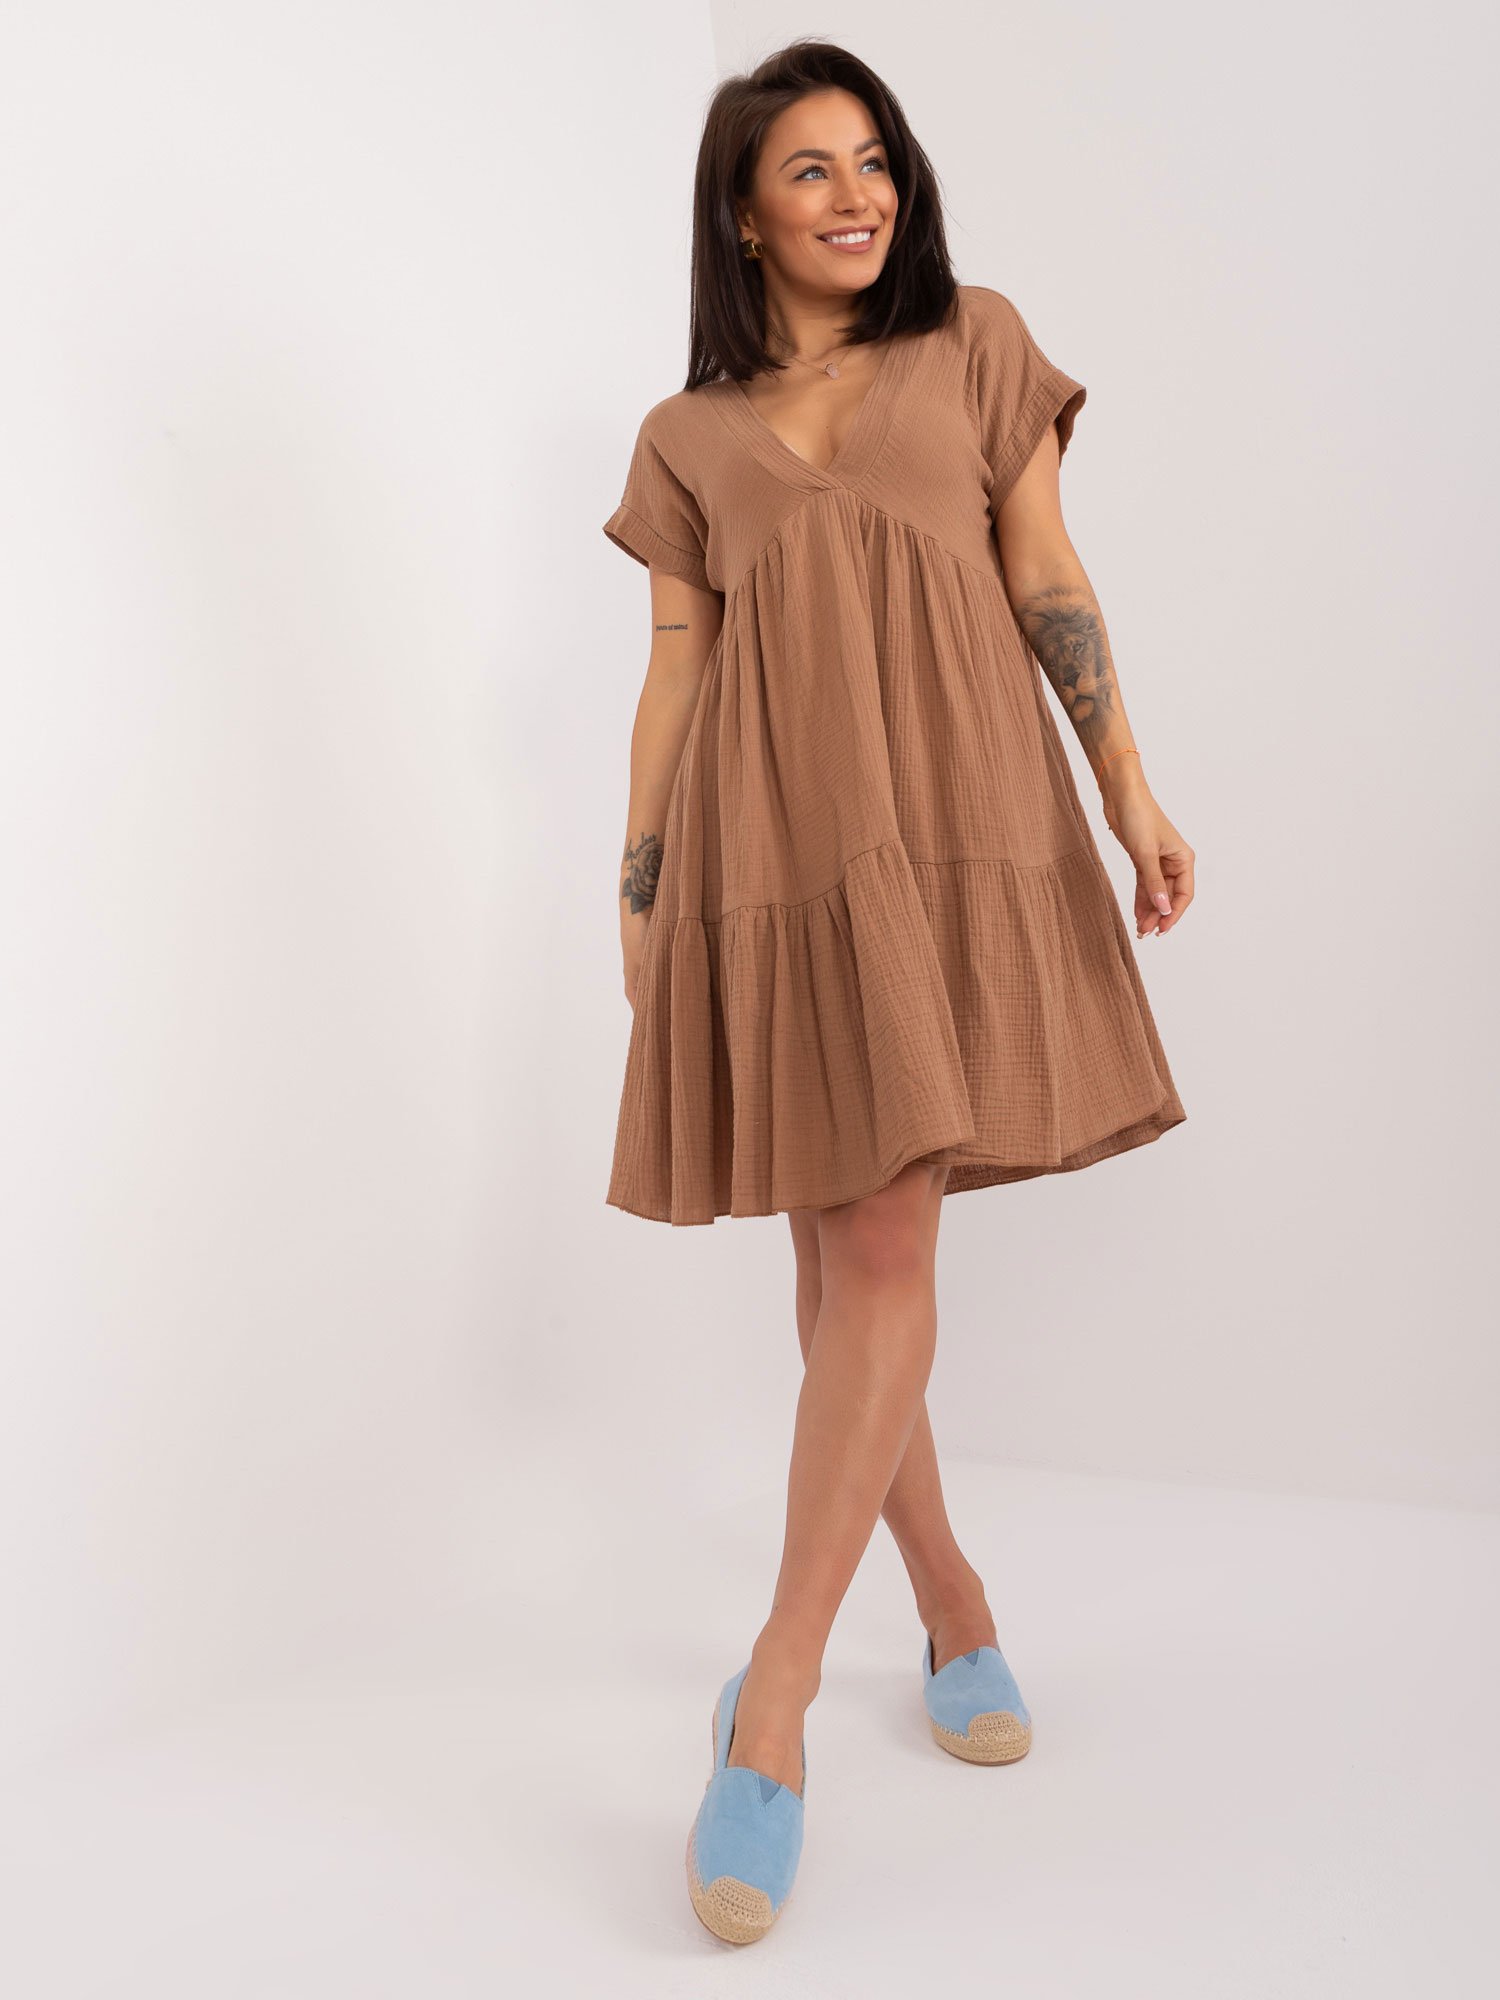 Brown flared dress with a neckline